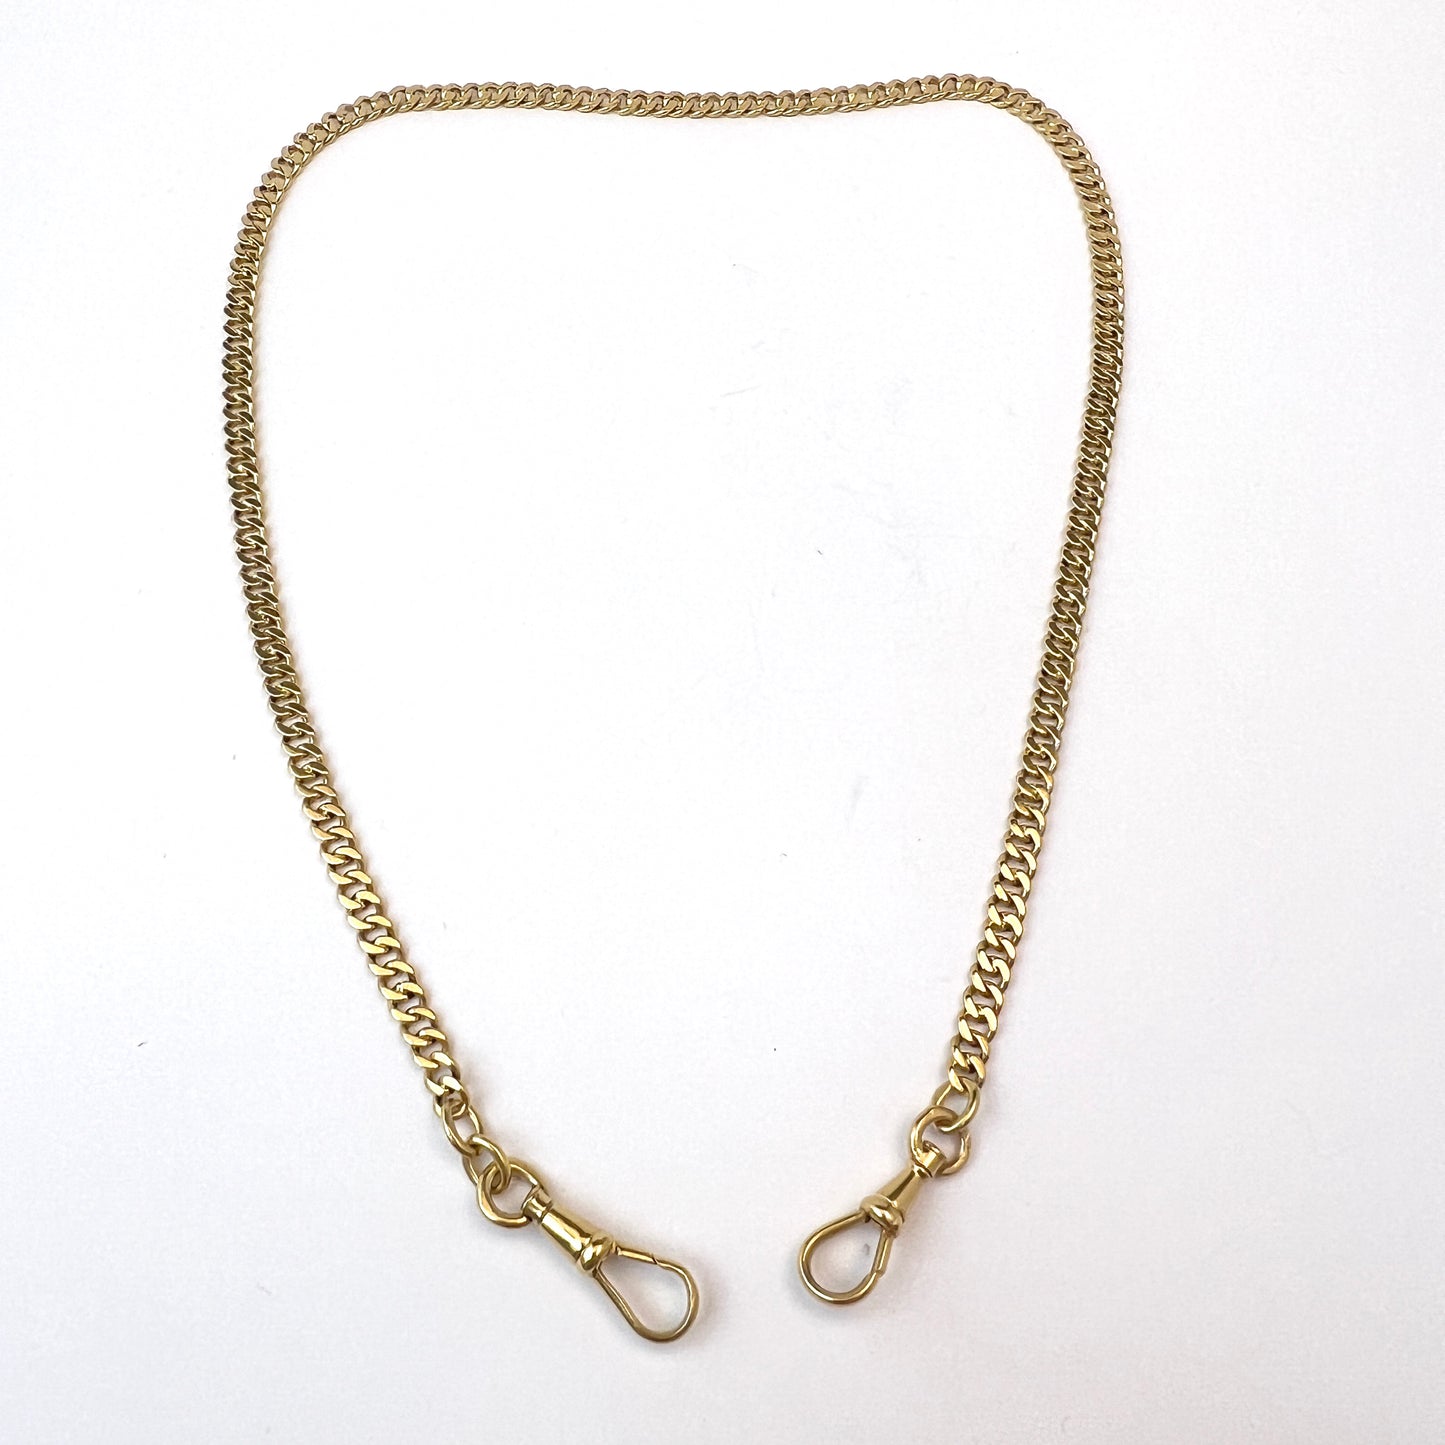 Sweden 1924. Antique 18k Gold Watch Chain in Necklace Length.